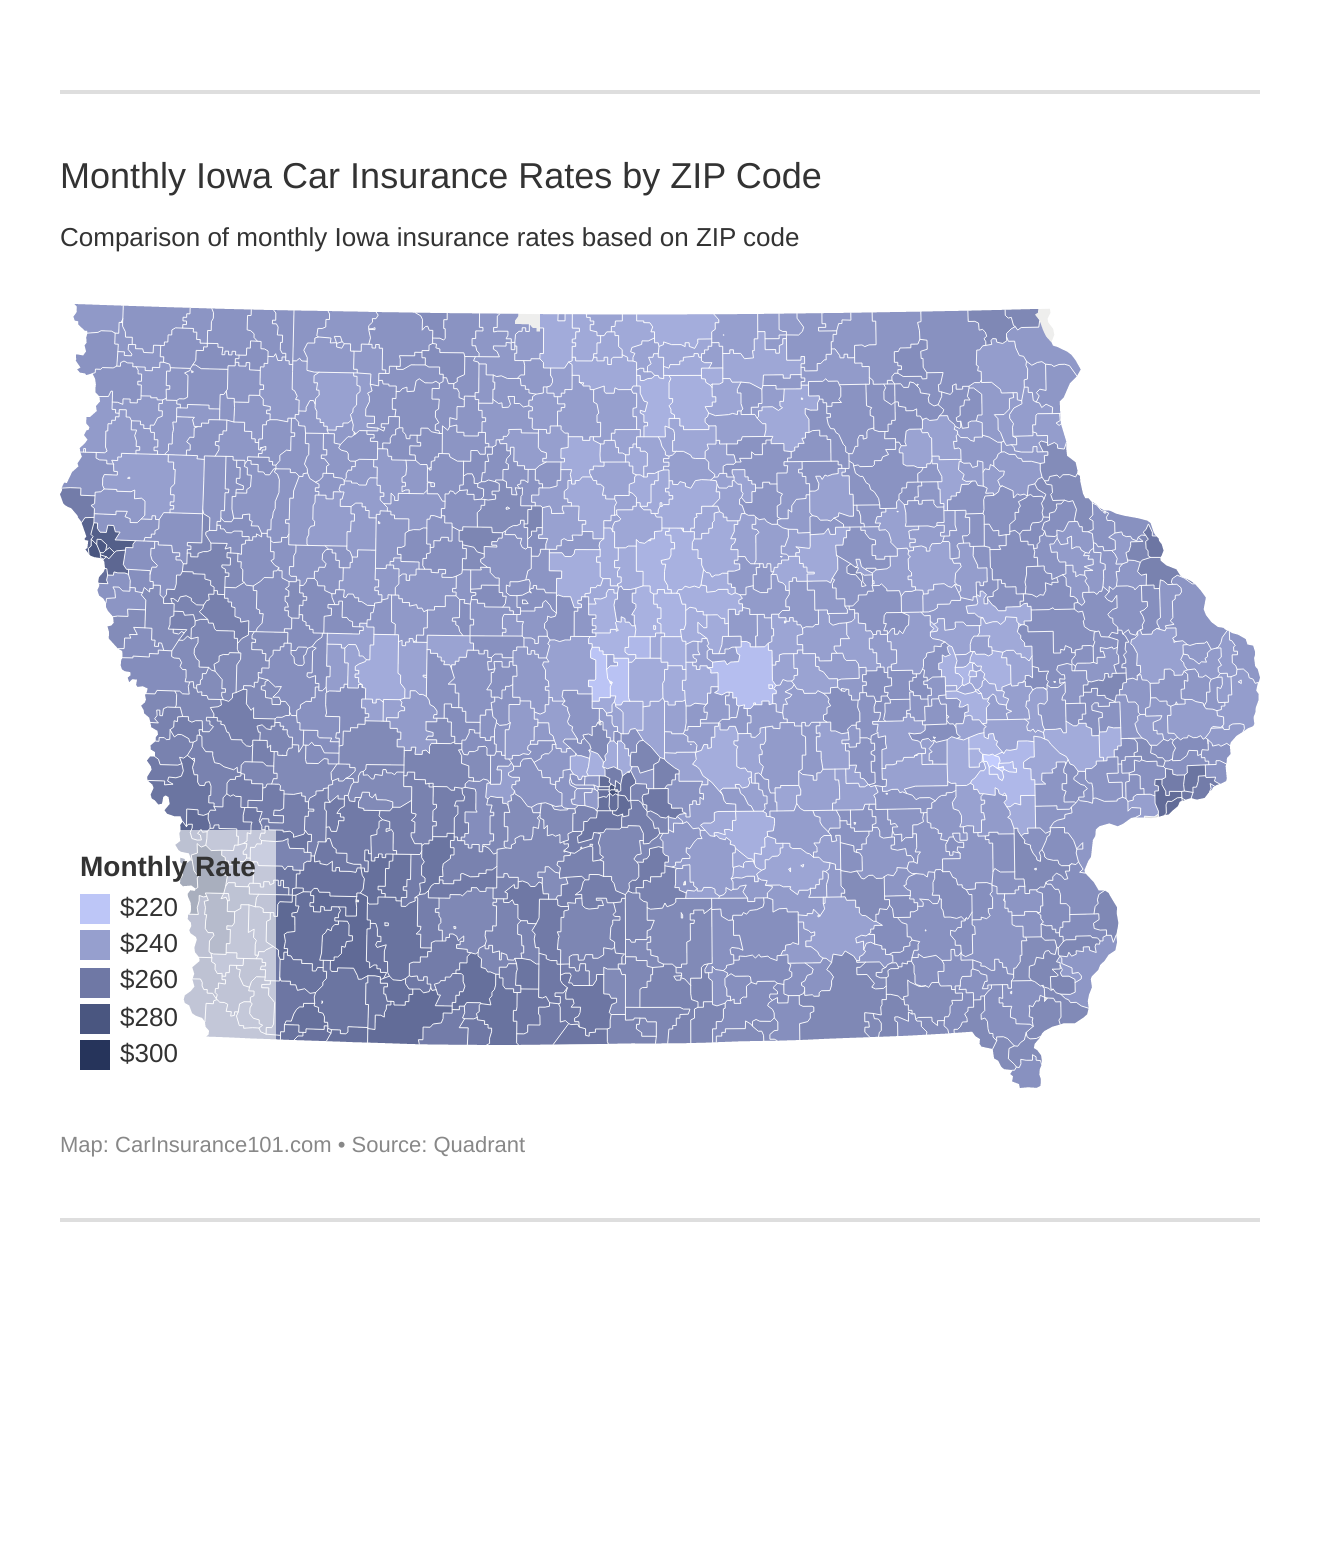 Monthly Iowa Car Insurance Rates by ZIP Code